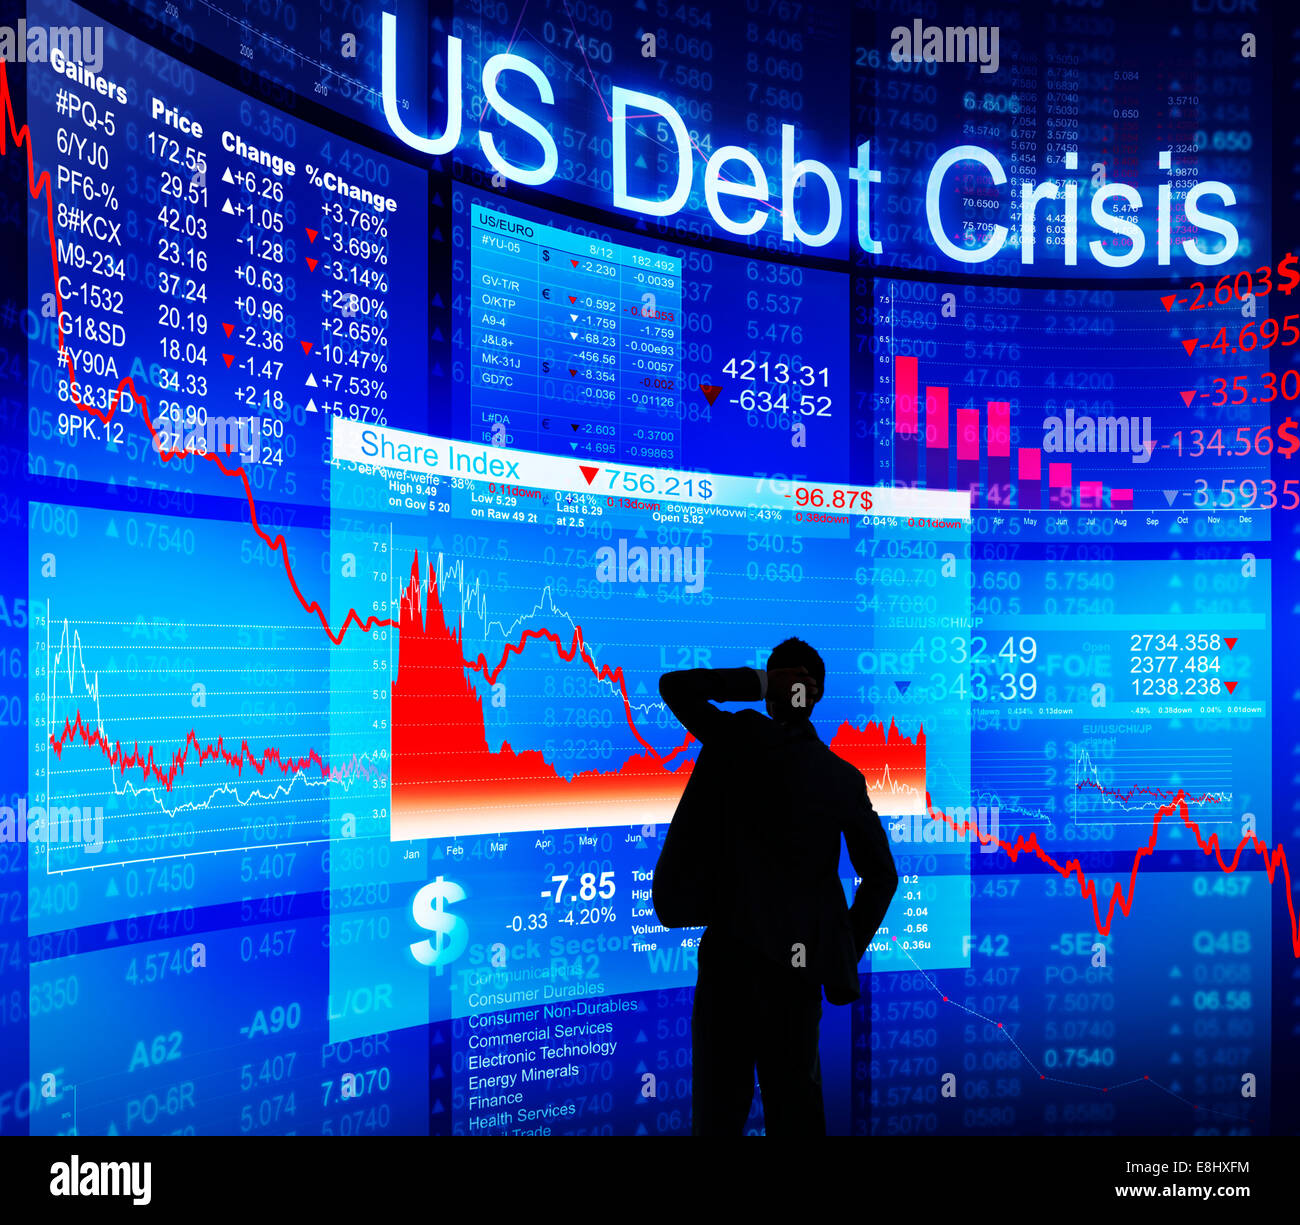 Silhouette of Businessman and US Debt Crisis Concept Stock Photo